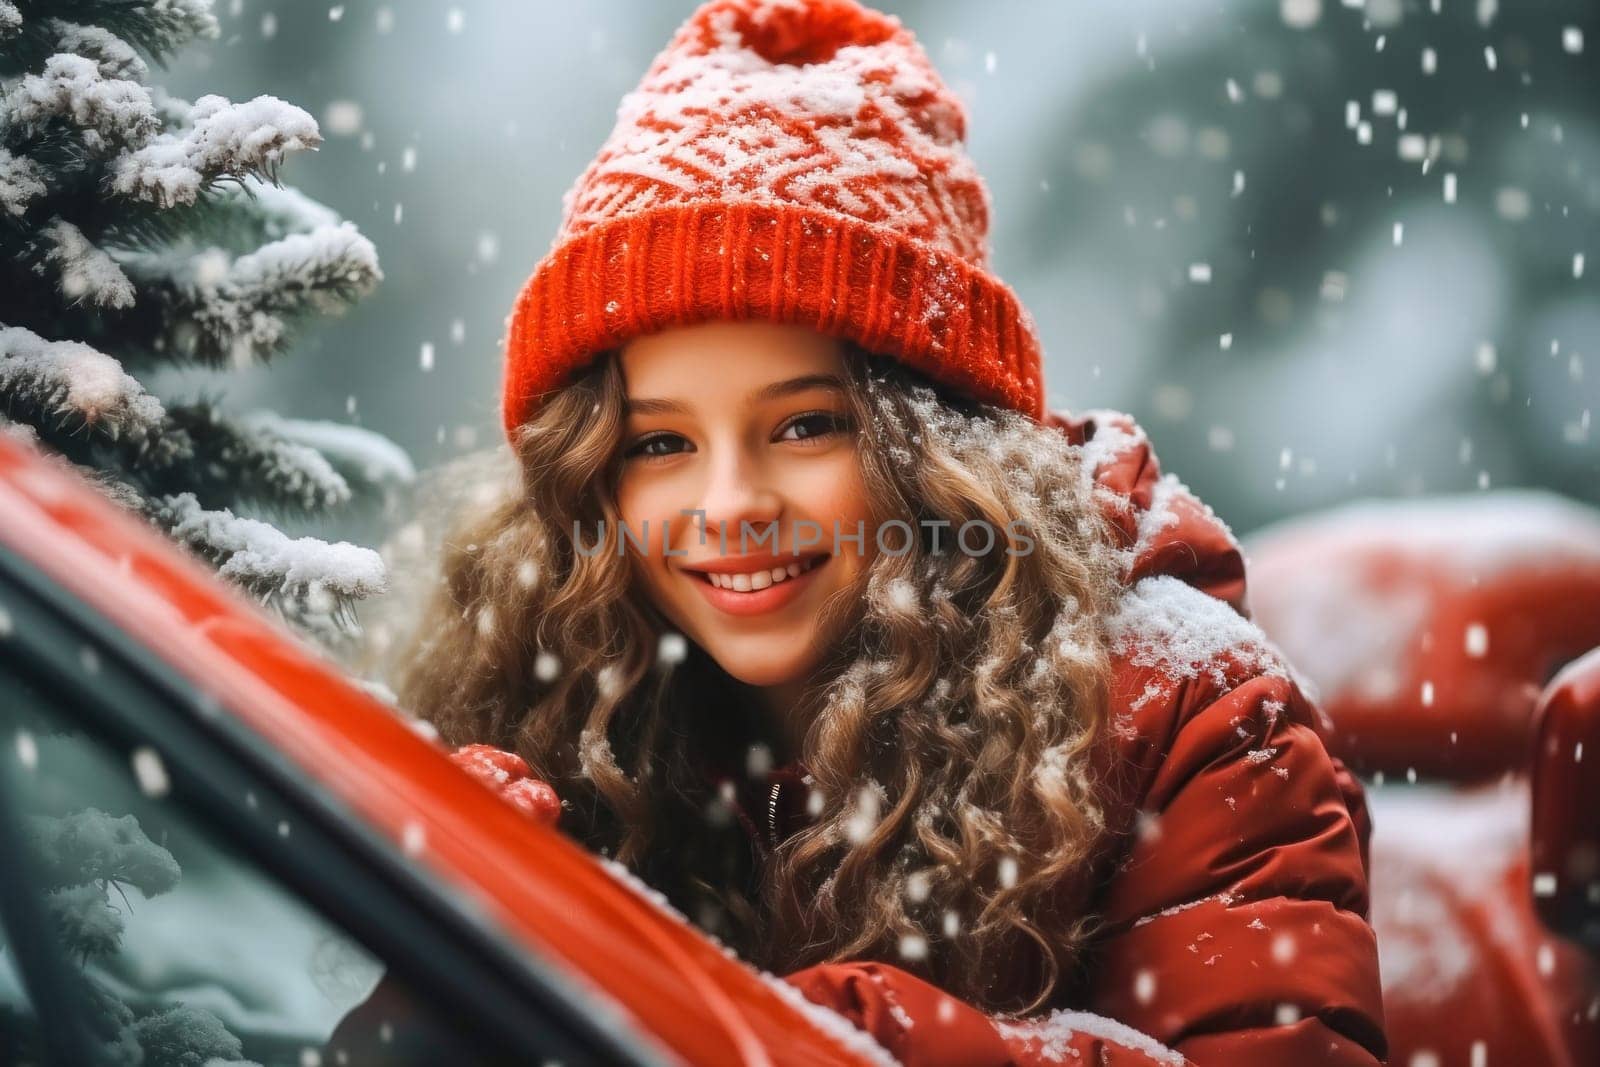 Happy girl in red hat standing by car on snowfall background in winter by Yurich32